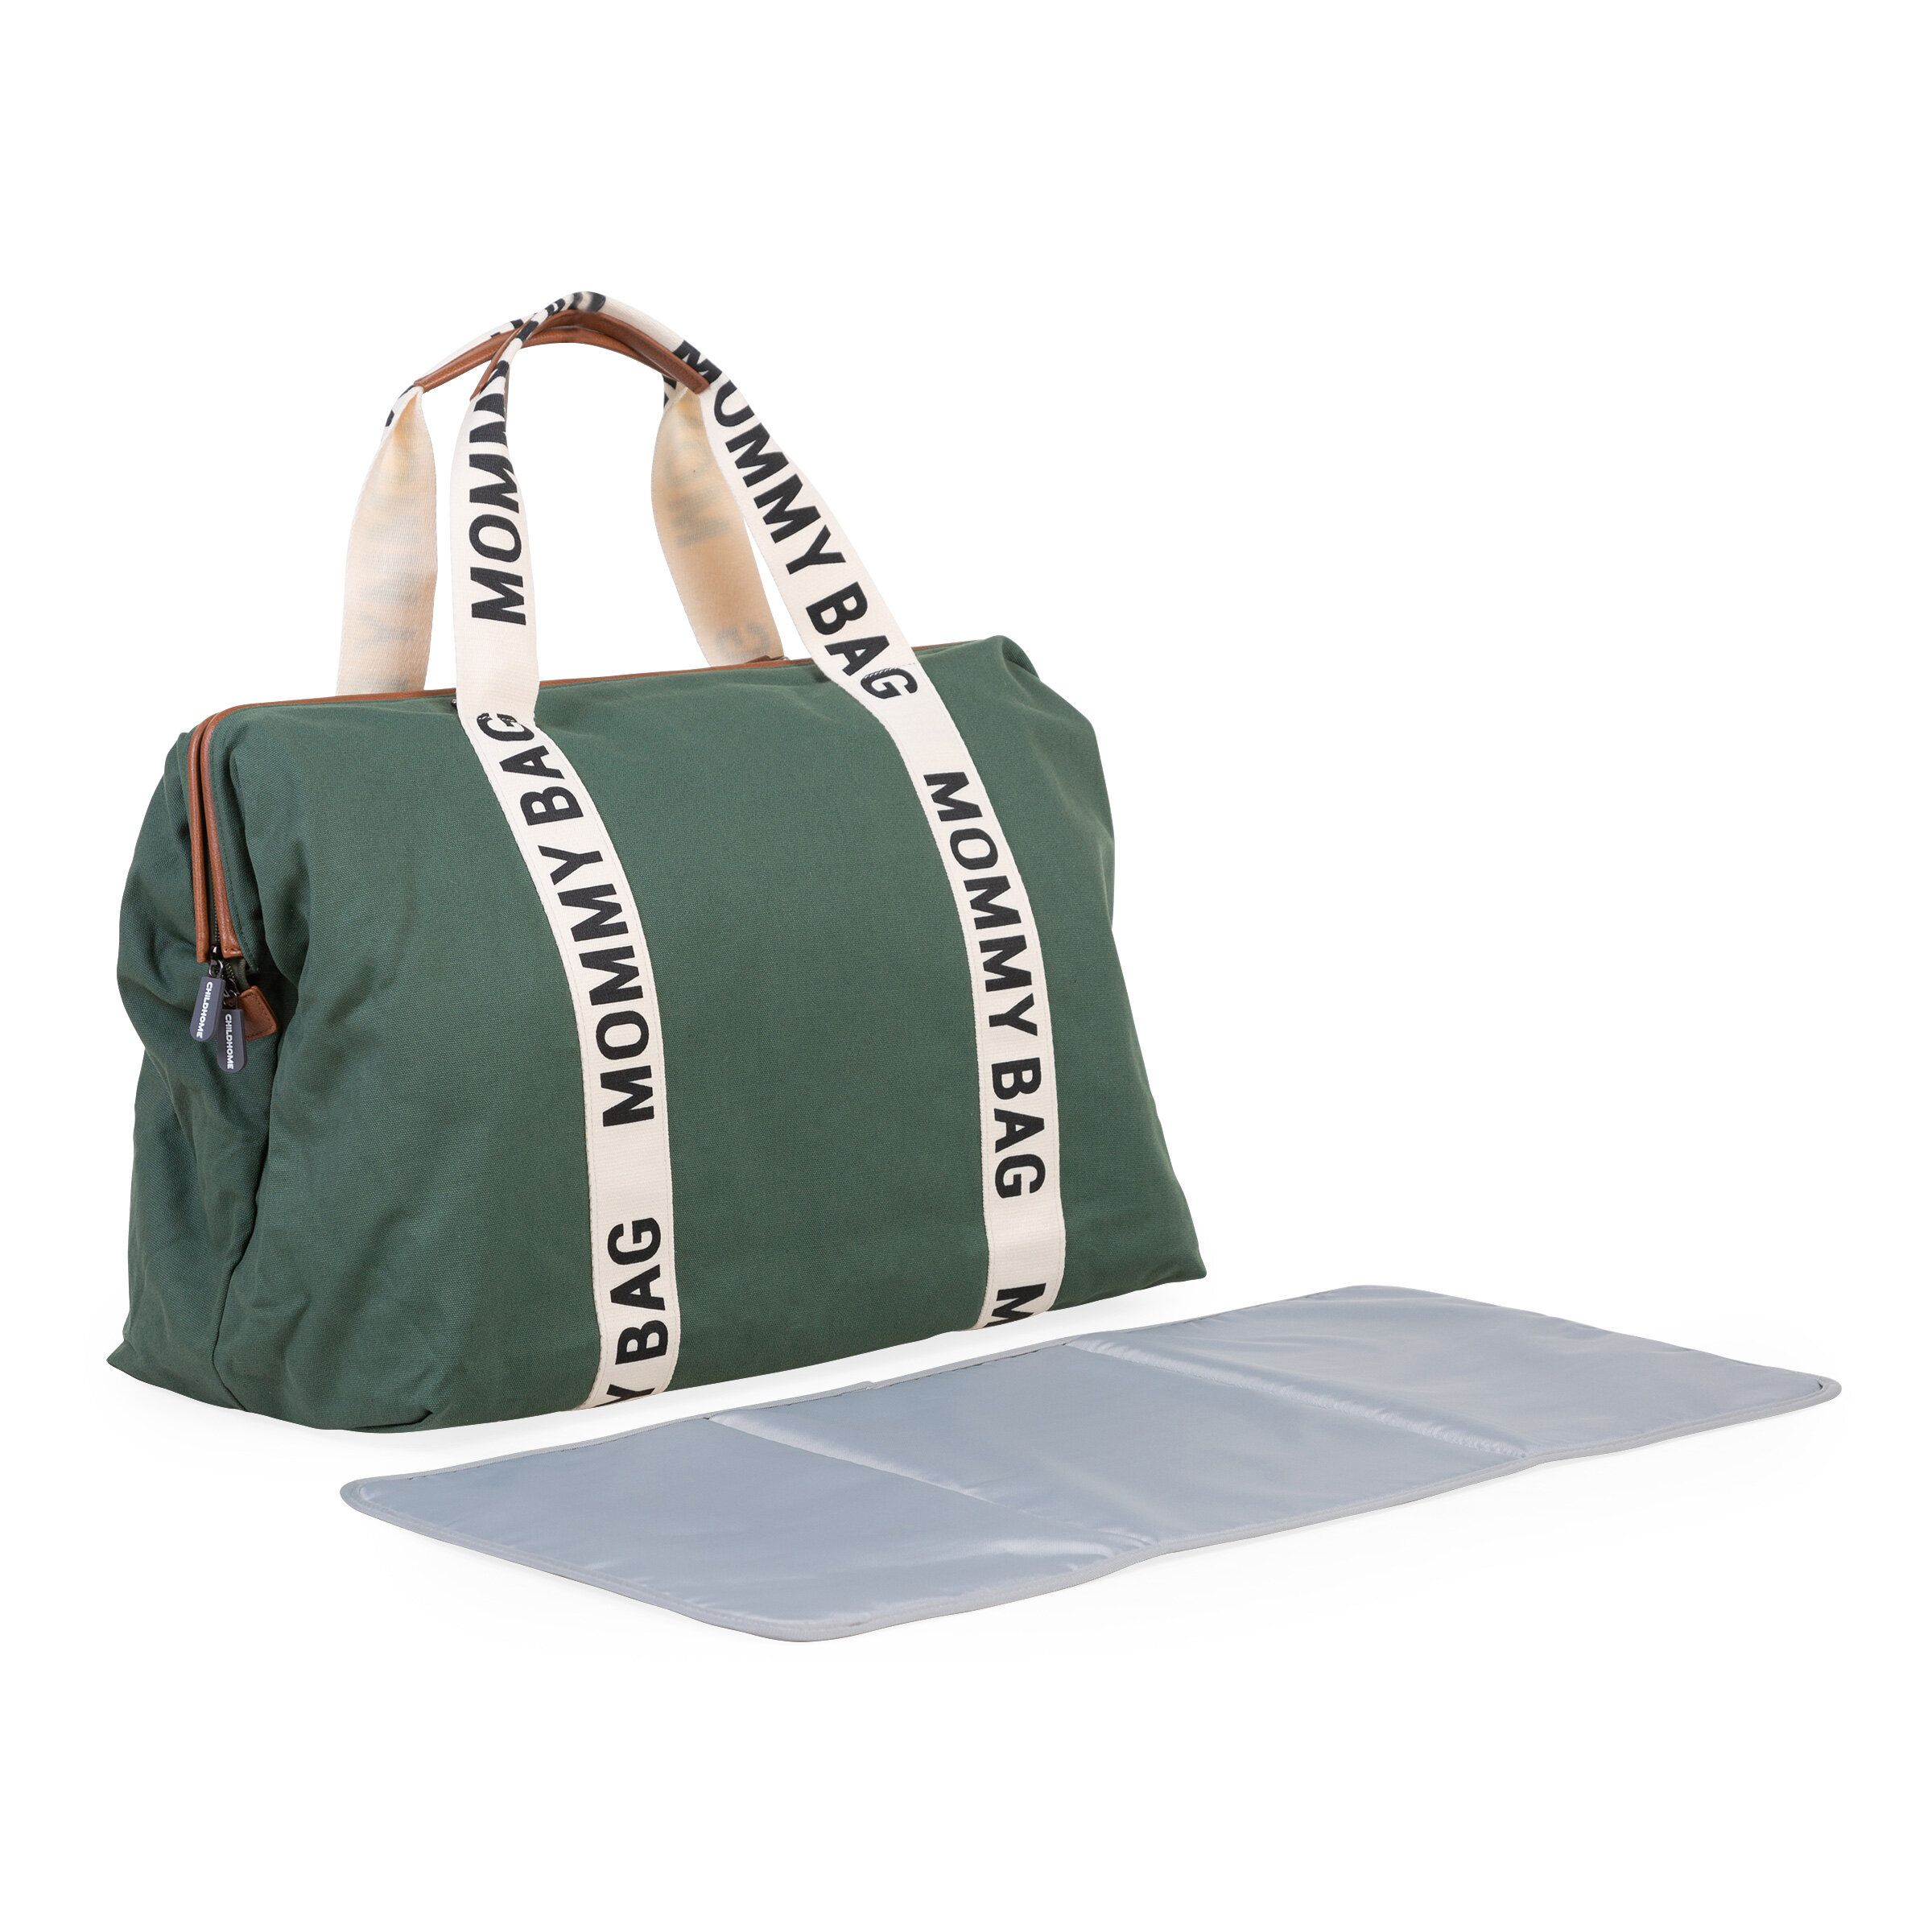 Childhome Mommy Bag ® Nursery Bag - Signature - Canvas - Green